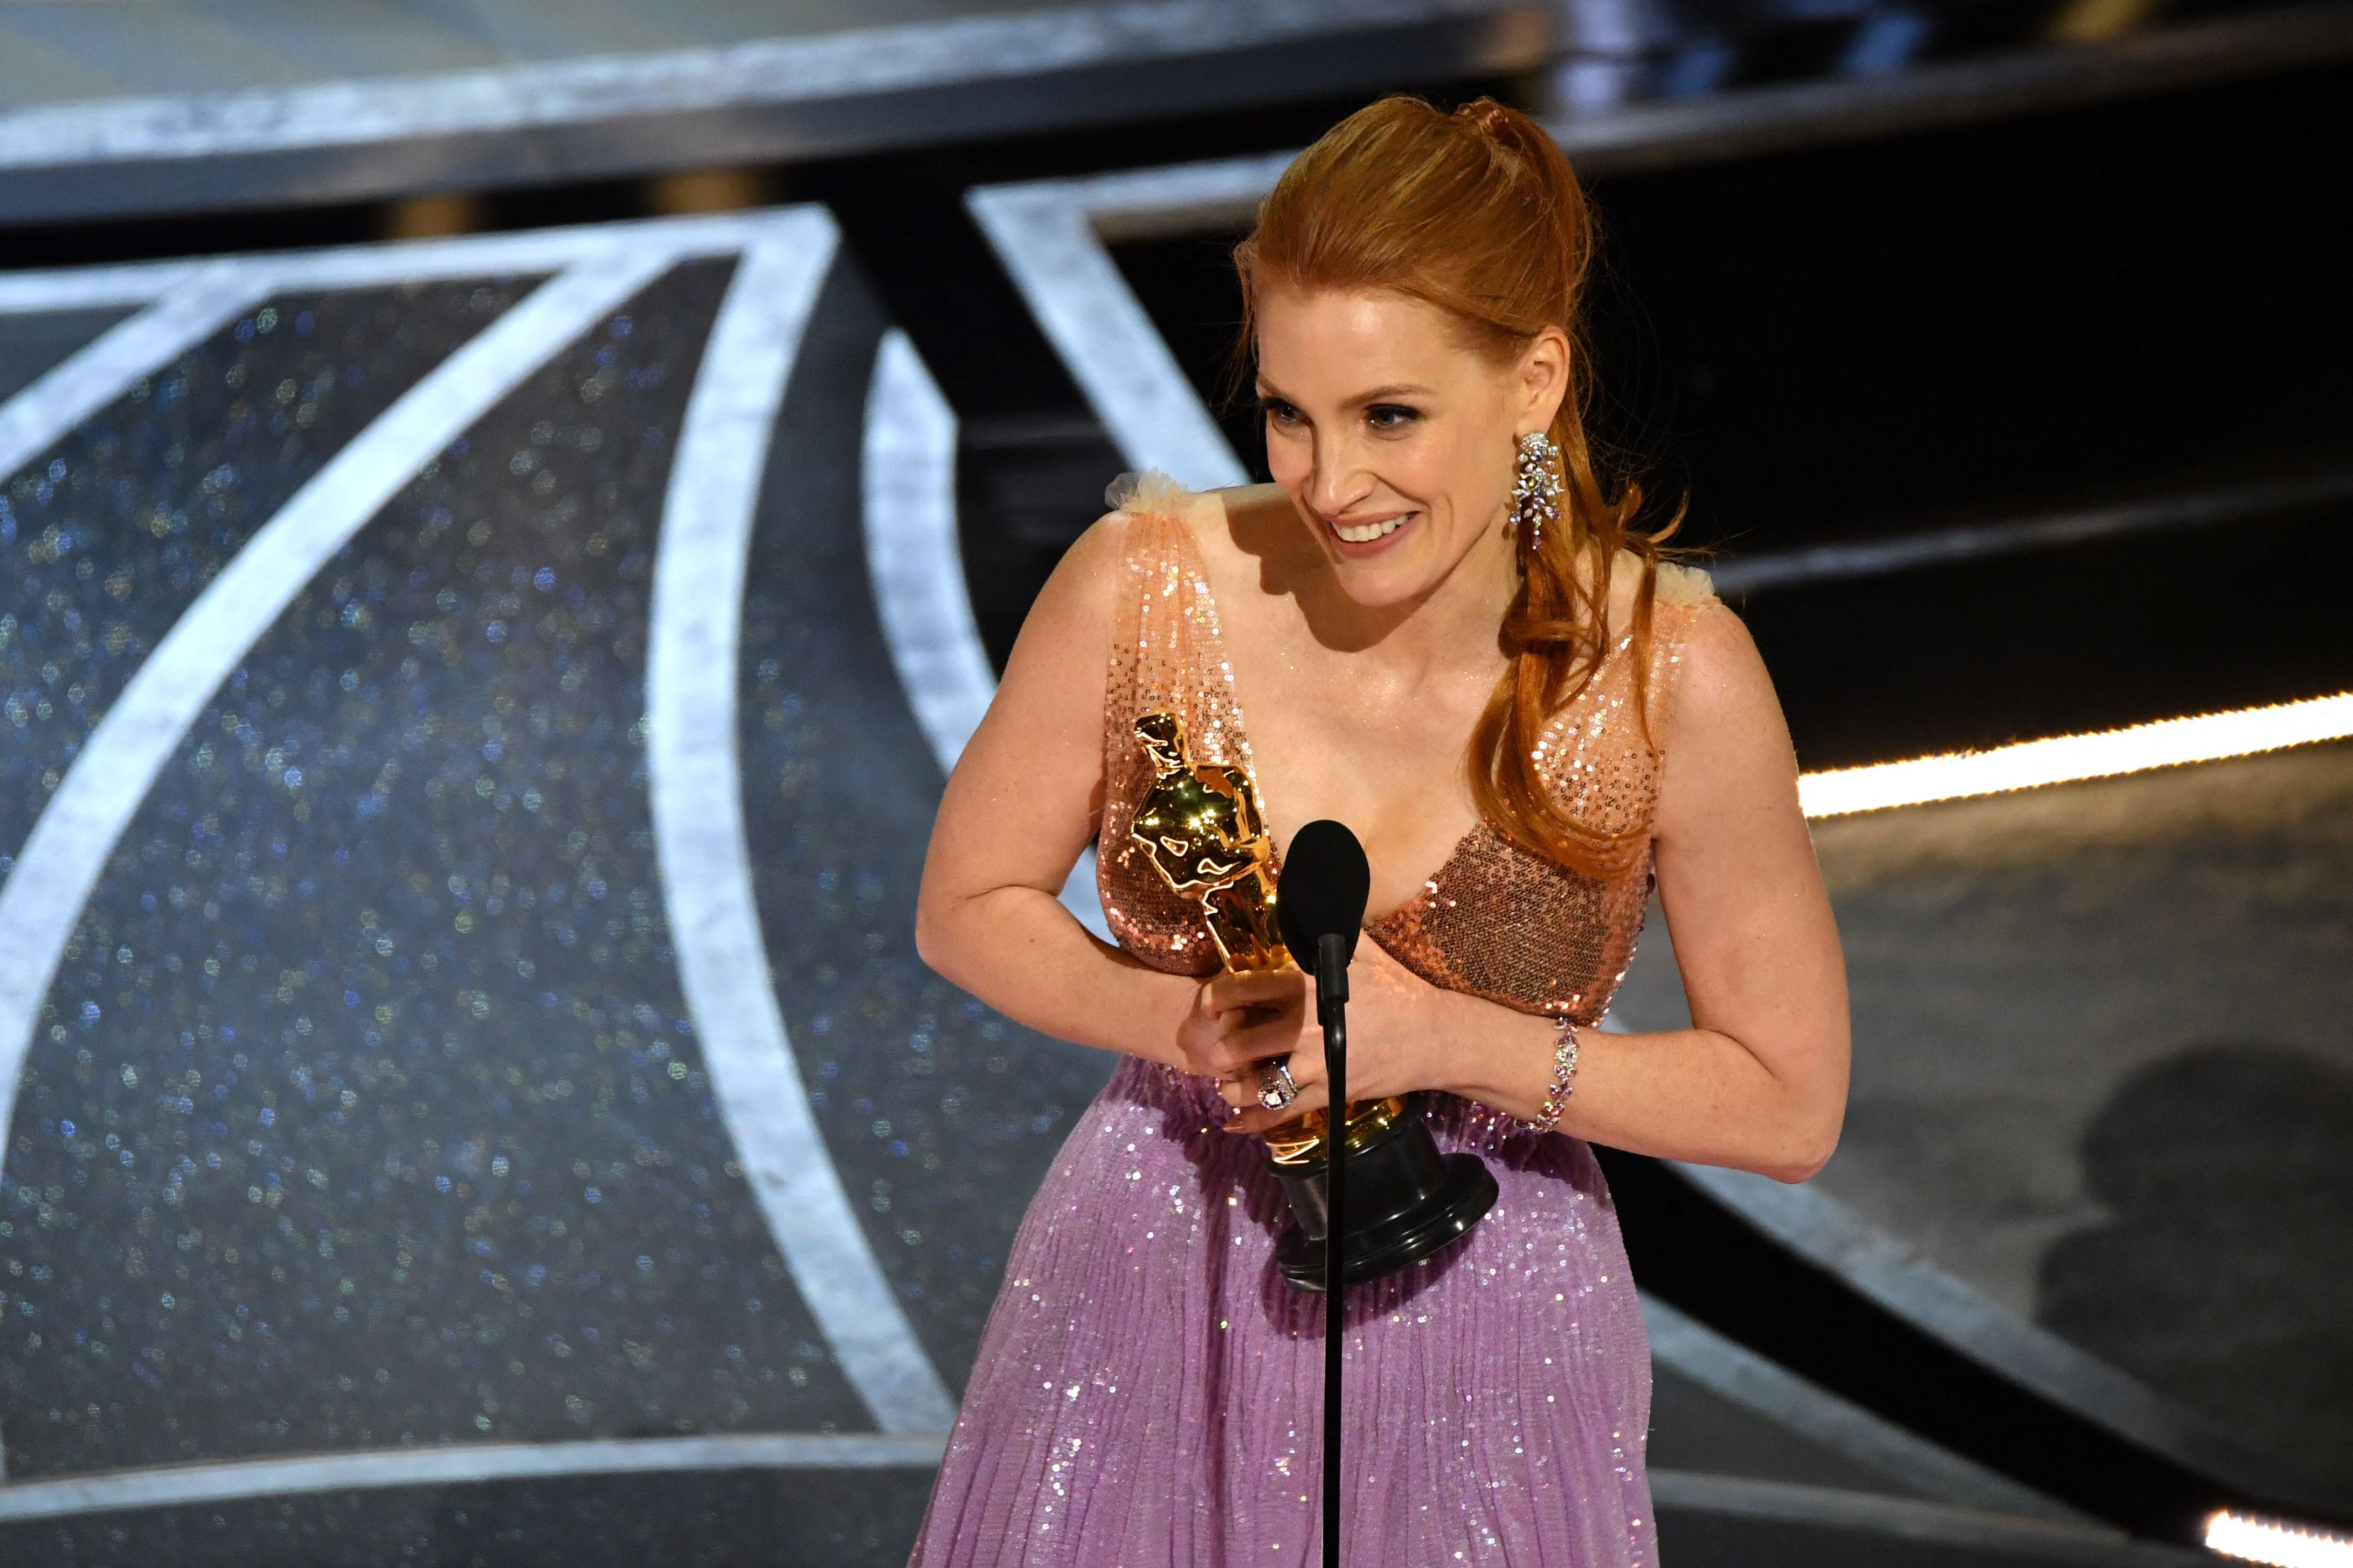 Jessica Chastain wins Best Actress Oscar for The Eyes of Tammy Faye